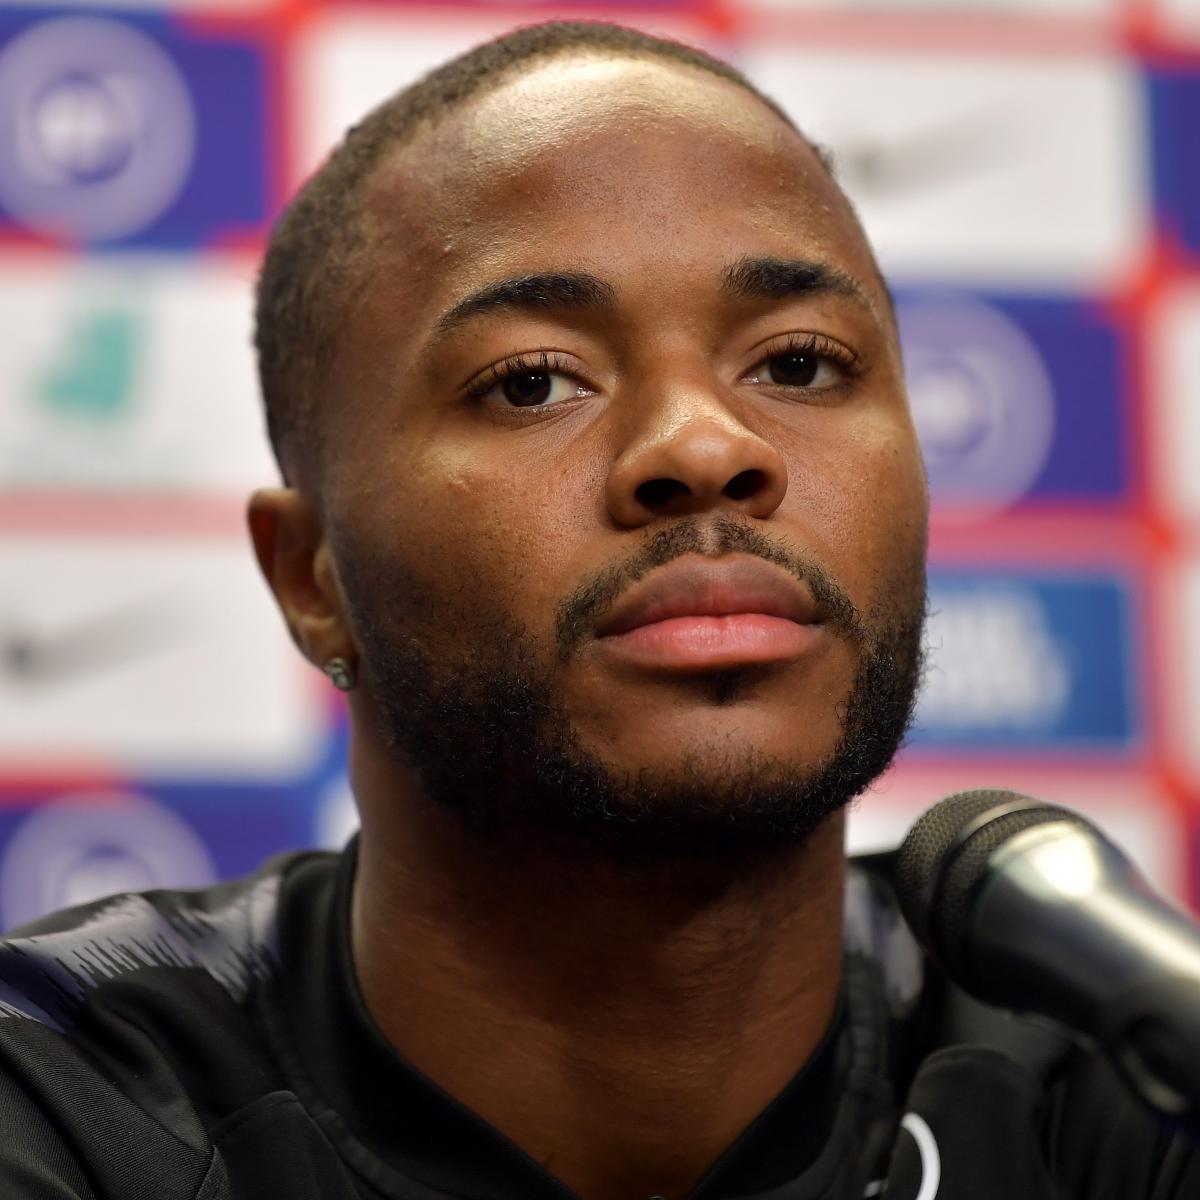 Raheem Sterling Says He Has 'Full Faith in UEFA' Amid Racism Concerns | Bleacher Report | Latest ...